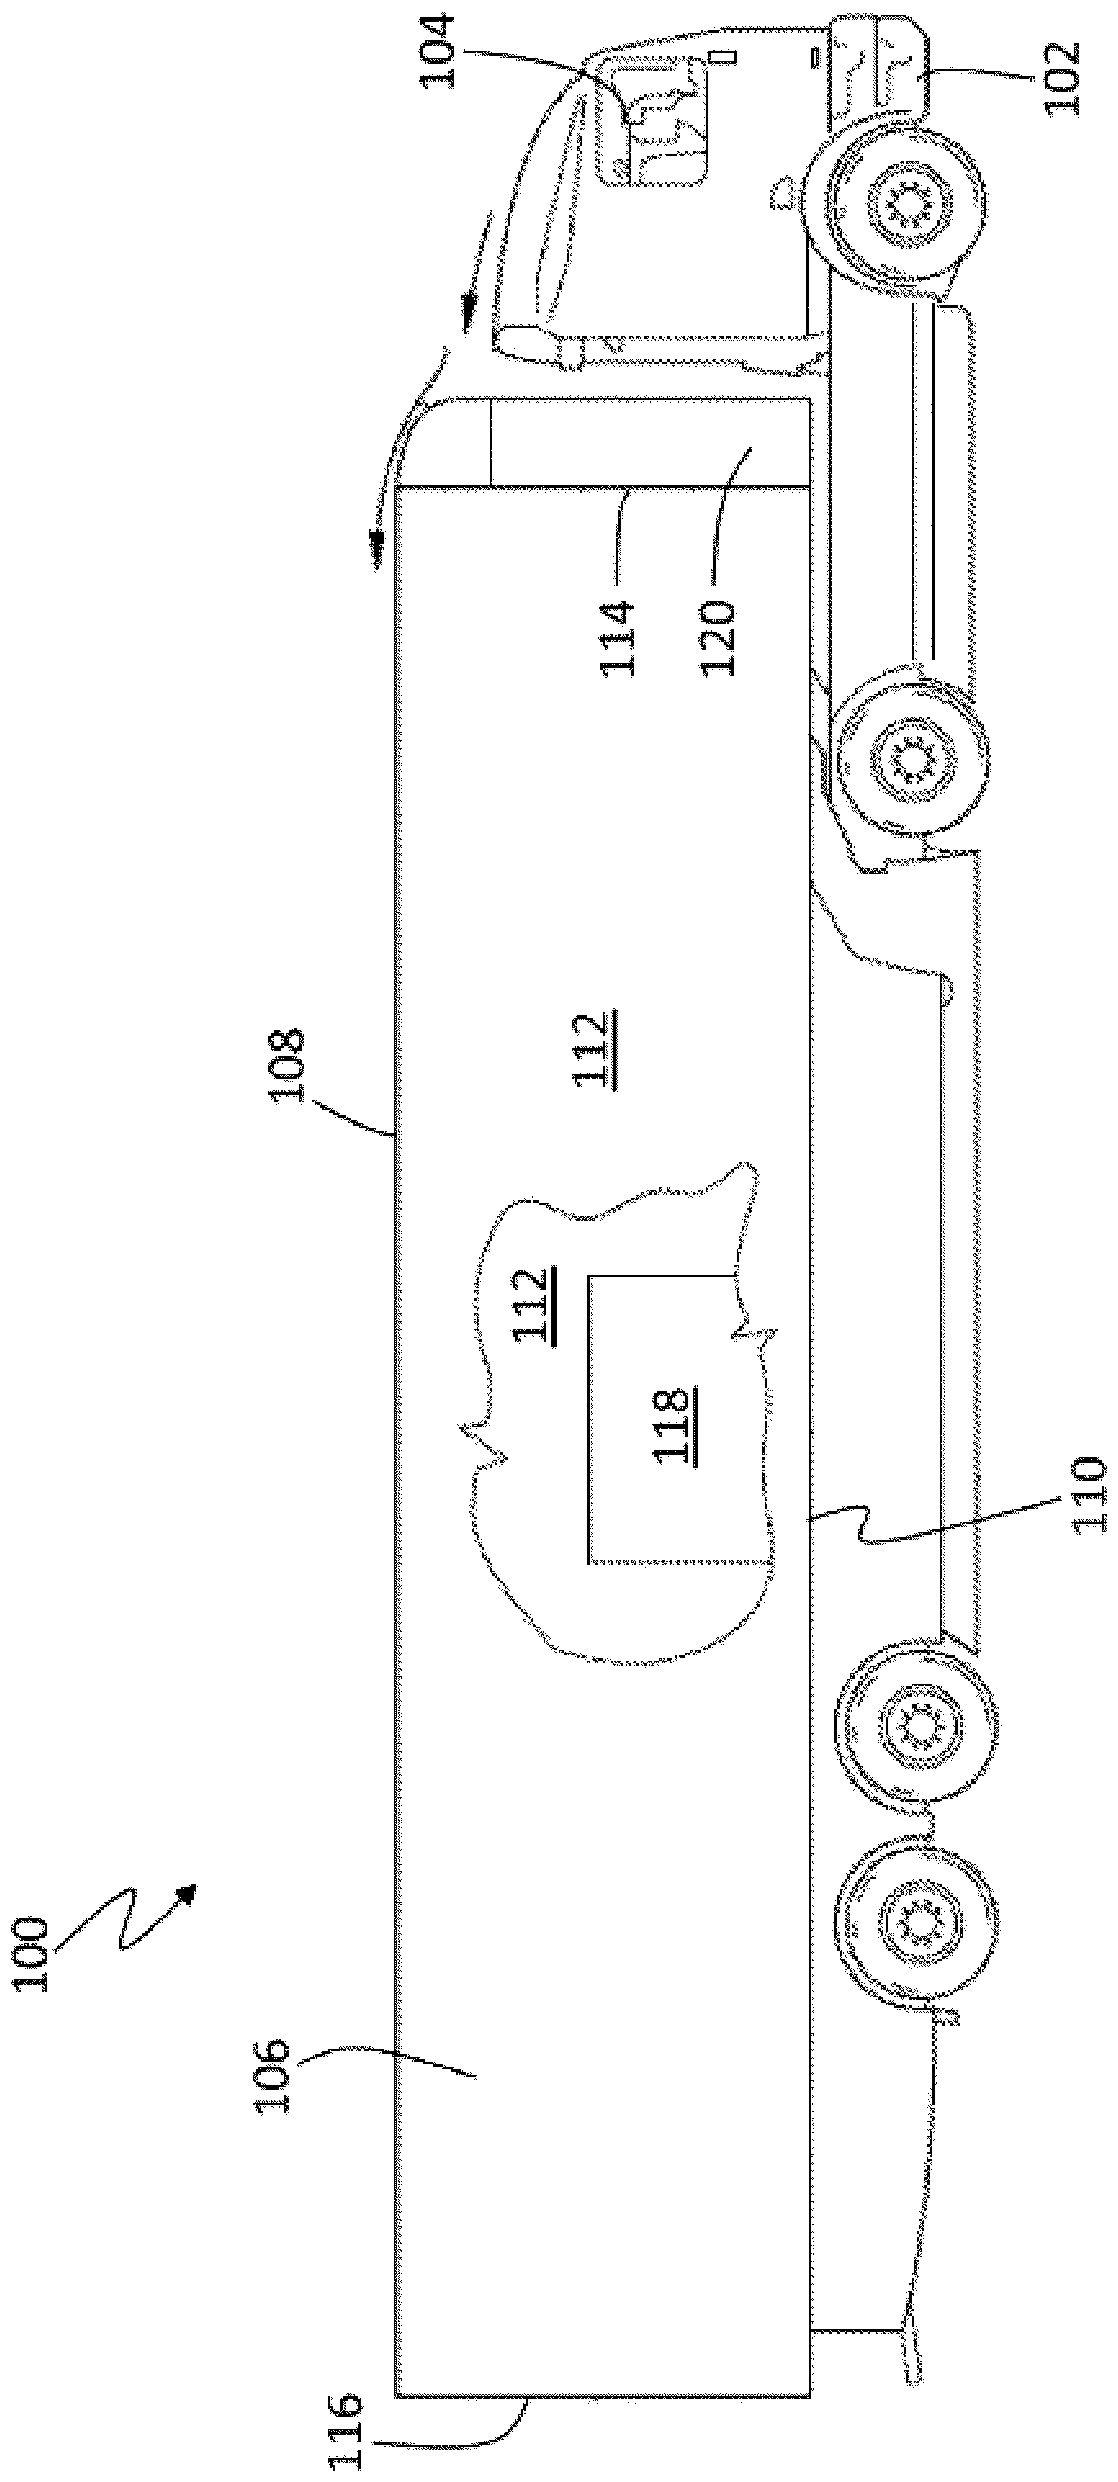 Economized device control for refrigeration system